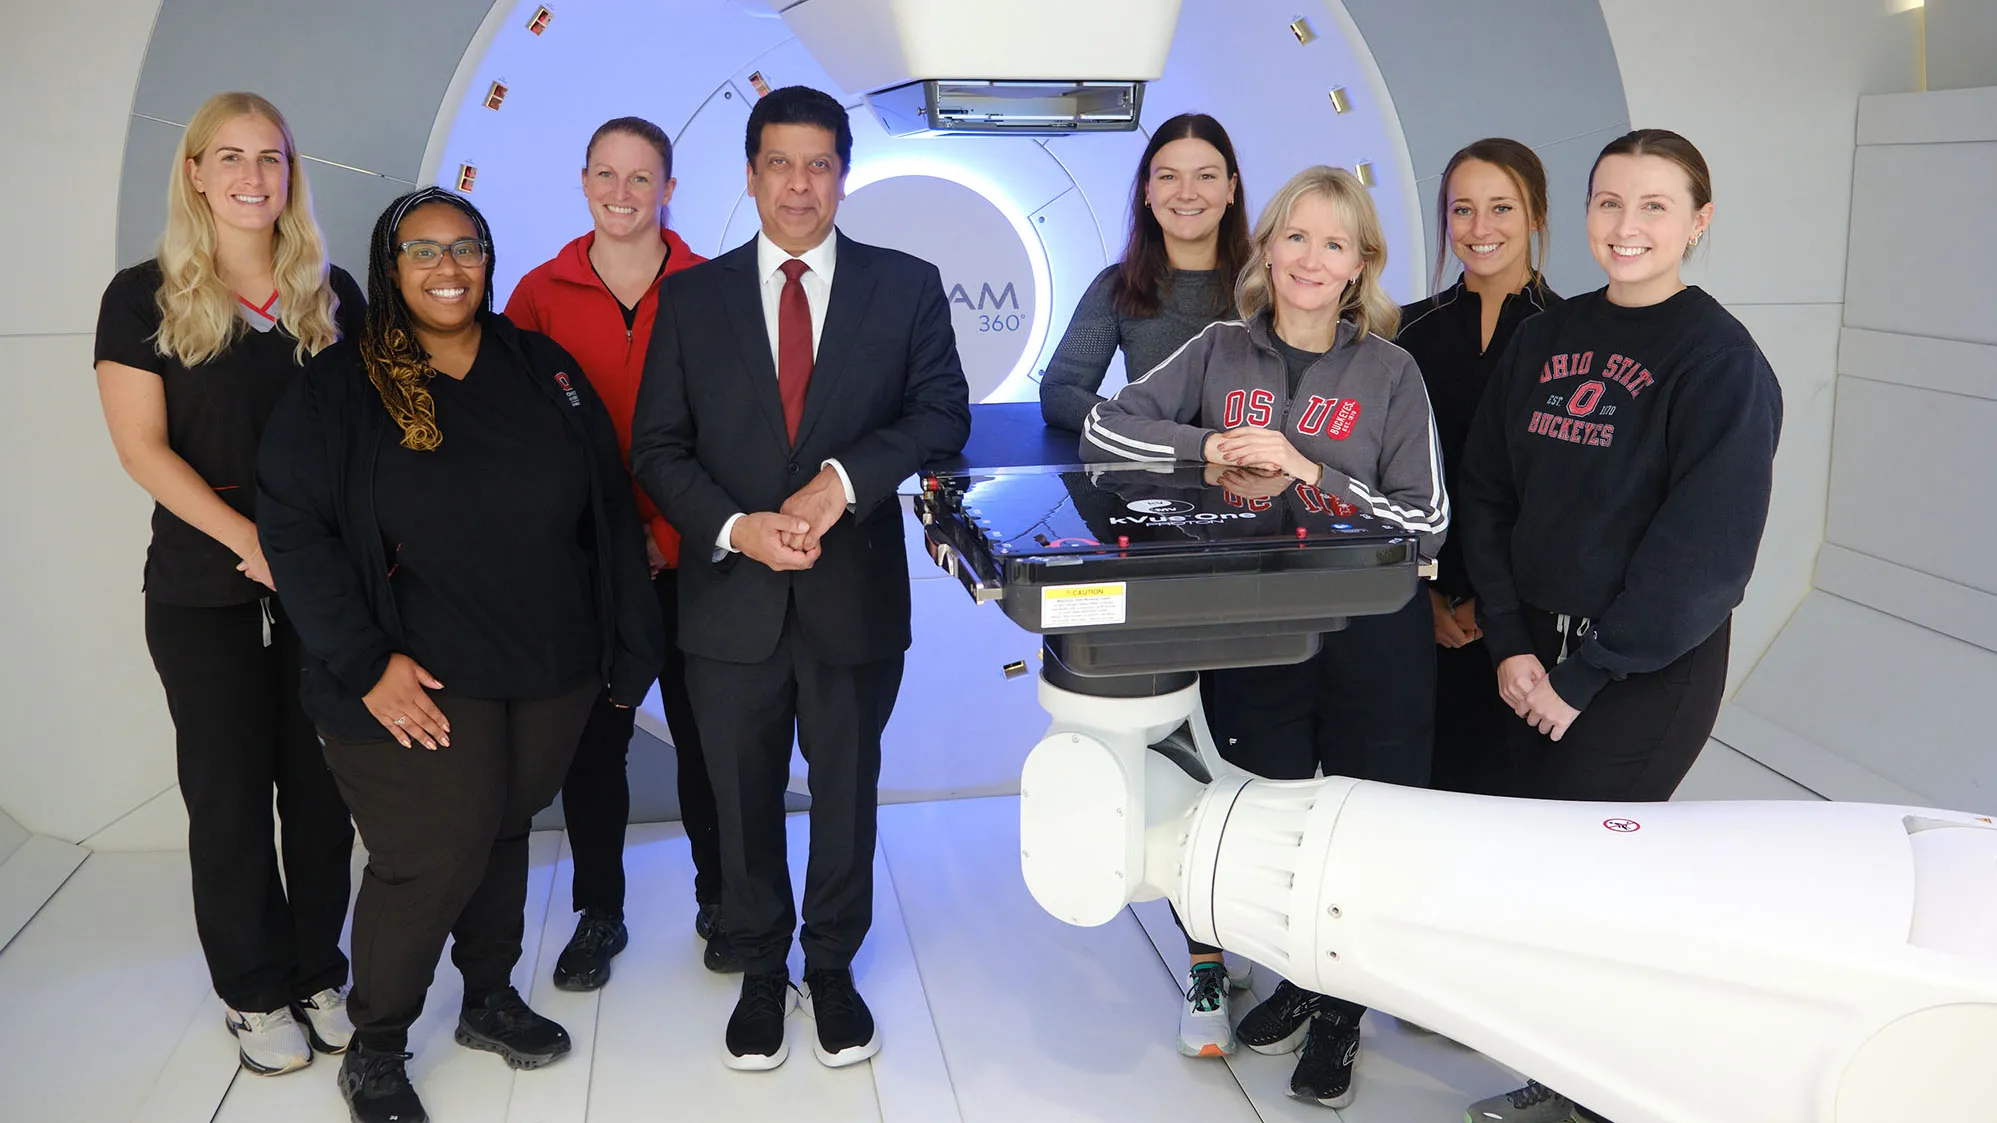 A team of people who work at Ohio State’s proton therapy center pose in the room where the treatment takes place. It is white-walled and appears spotless. They are eight smiling people—seven women—wearing scrubs or Ohio State sweatshirts. Dr. Arnab Chakravarti stands near the center in a suit.